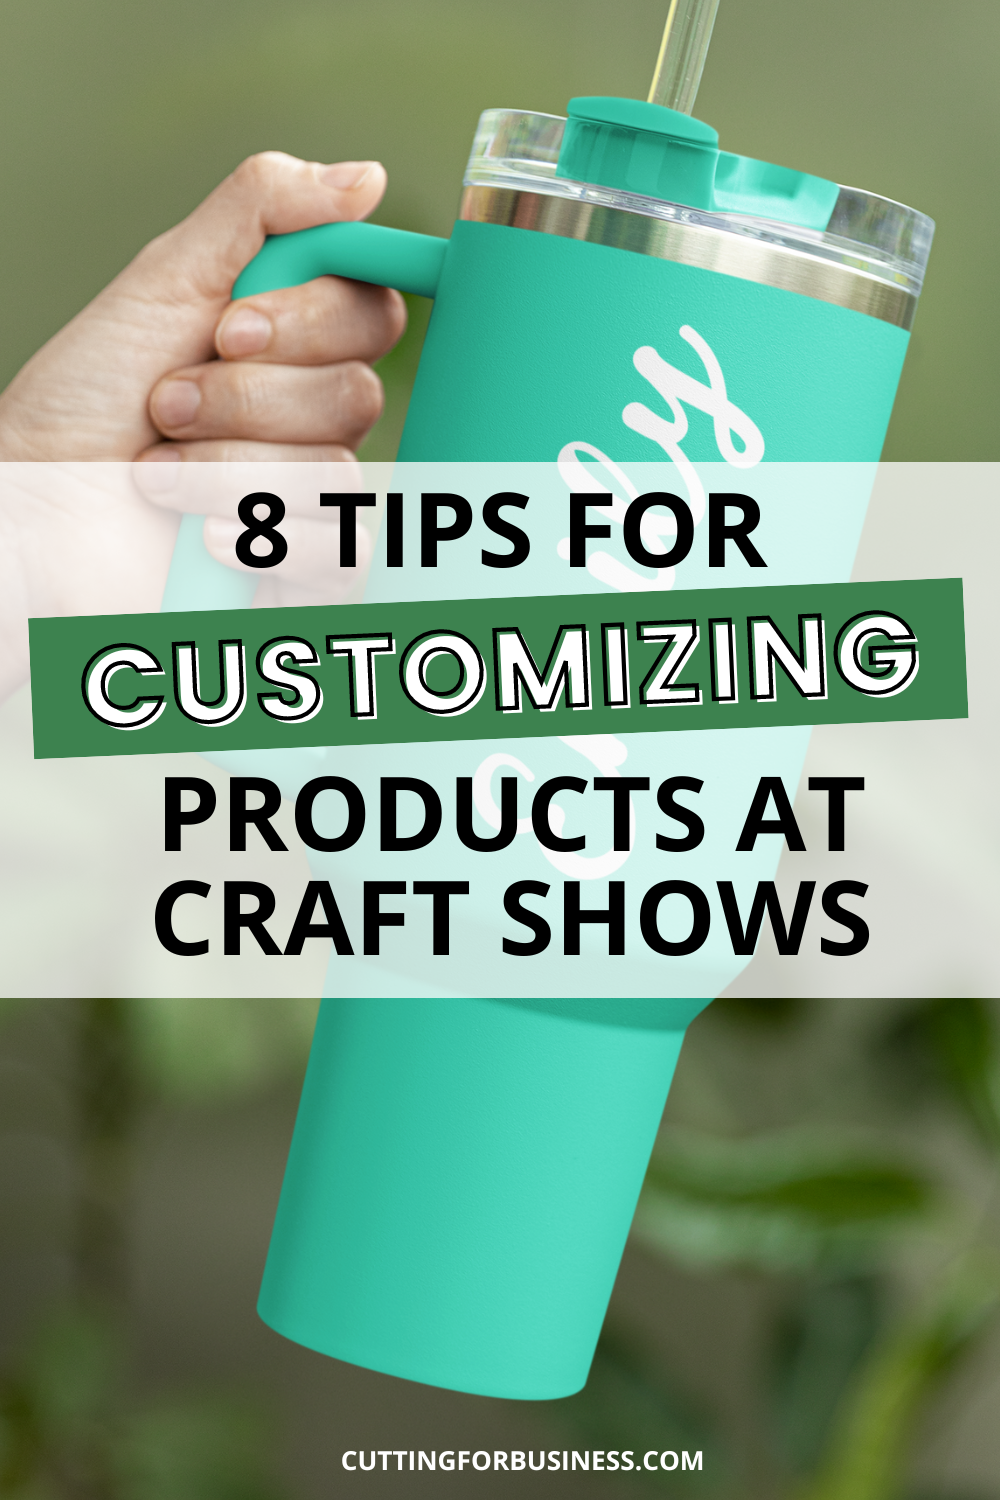 8 Tips for Customizing Products at Craft Shows - cuttingforbusiness.com